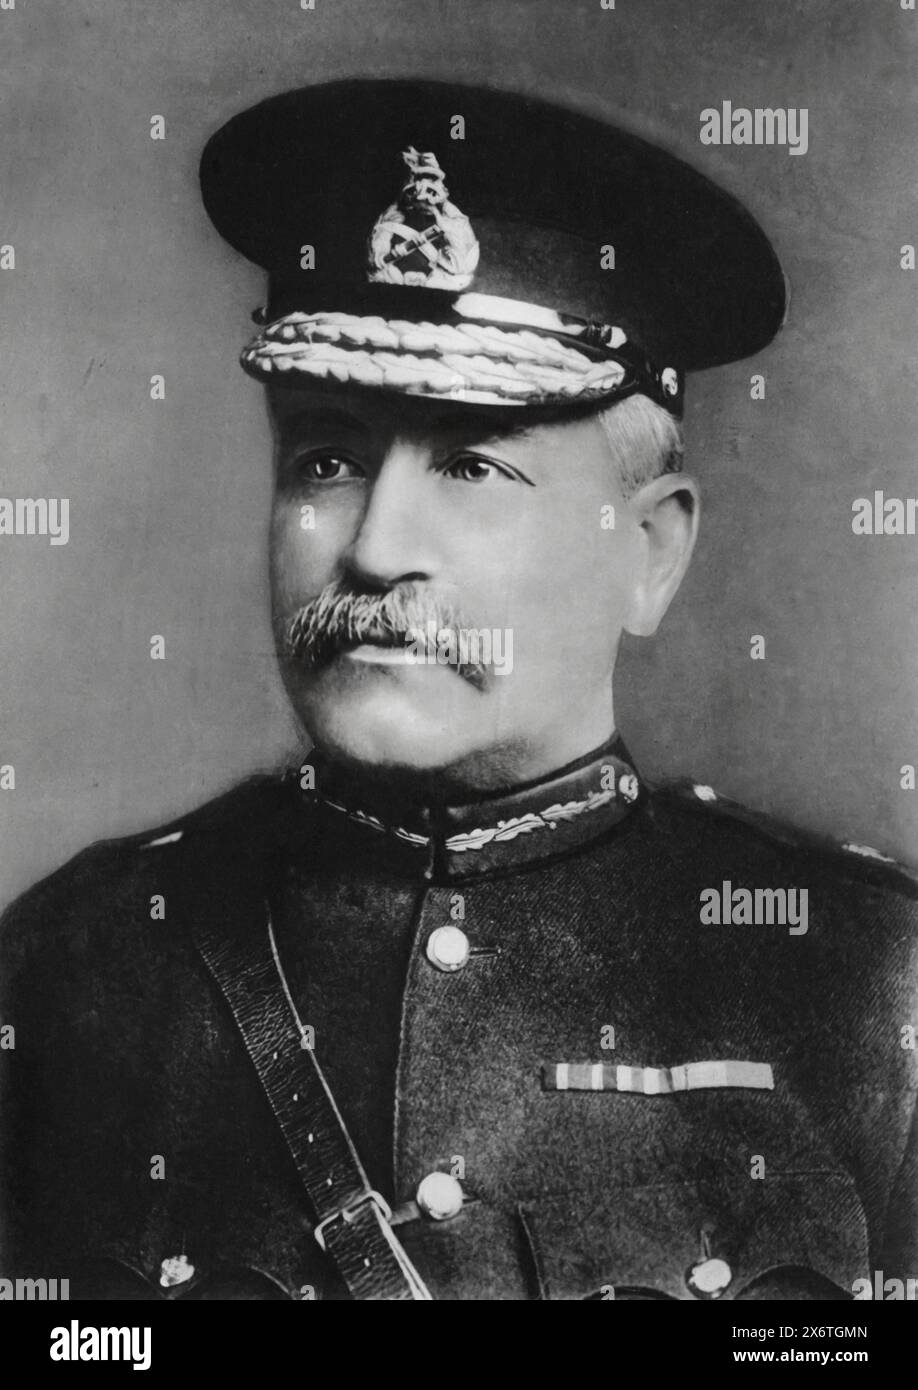 A portrait of General Sir Charles C. Monro, Supreme Commander of the British troops in the Balkan area during the First World War. Monro is notable for his role in the successful evacuation of Allied forces from Gallipoli in 1915, following a failed campaign to secure a sea route to Russia. His leadership and actions saved many lives during that operation. Stock Photo